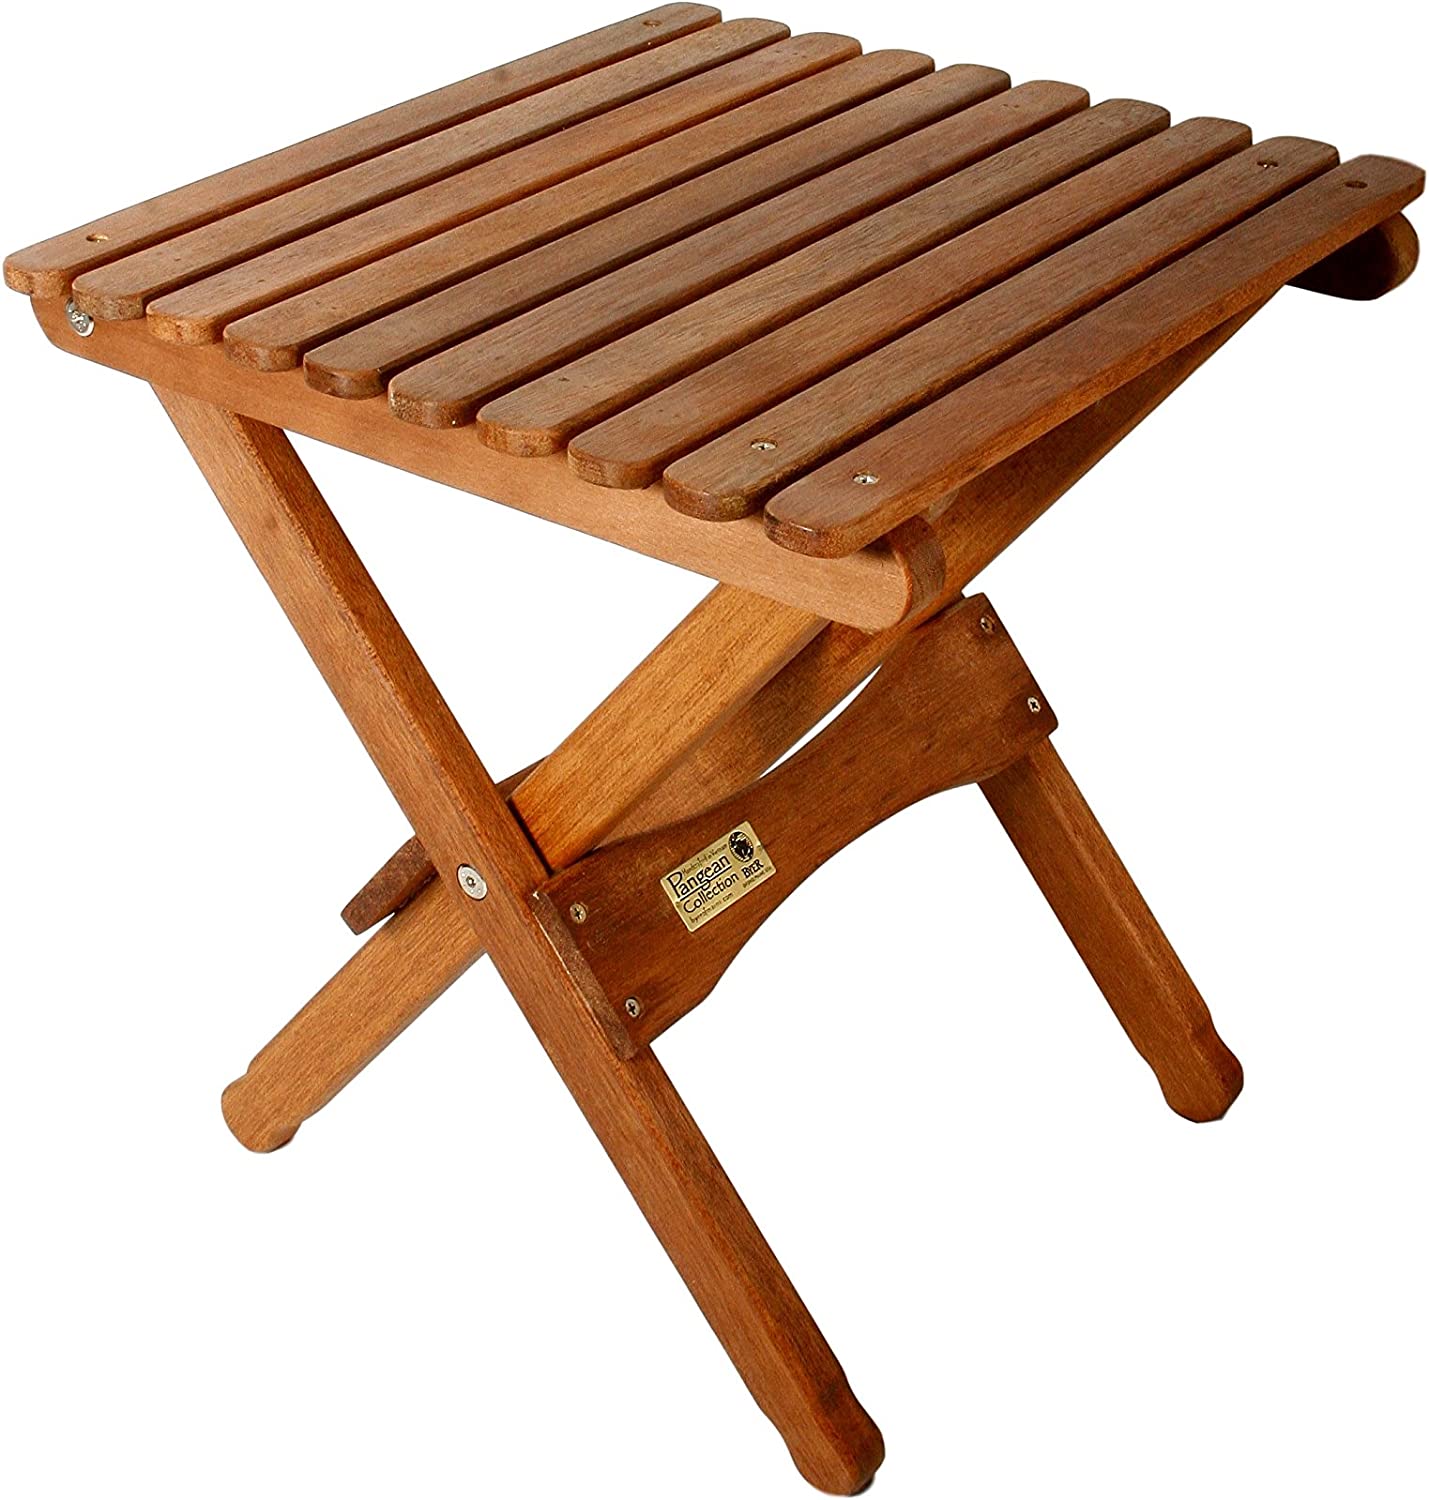 BYER OF MAINE Pangean Folding Wooden Table, Hardwood Portable Table, Multi Use Table, Easy to Fold and Carry for Camping, Wooden Camp Table, Use Indoors, Matches Pangean Furniture Line